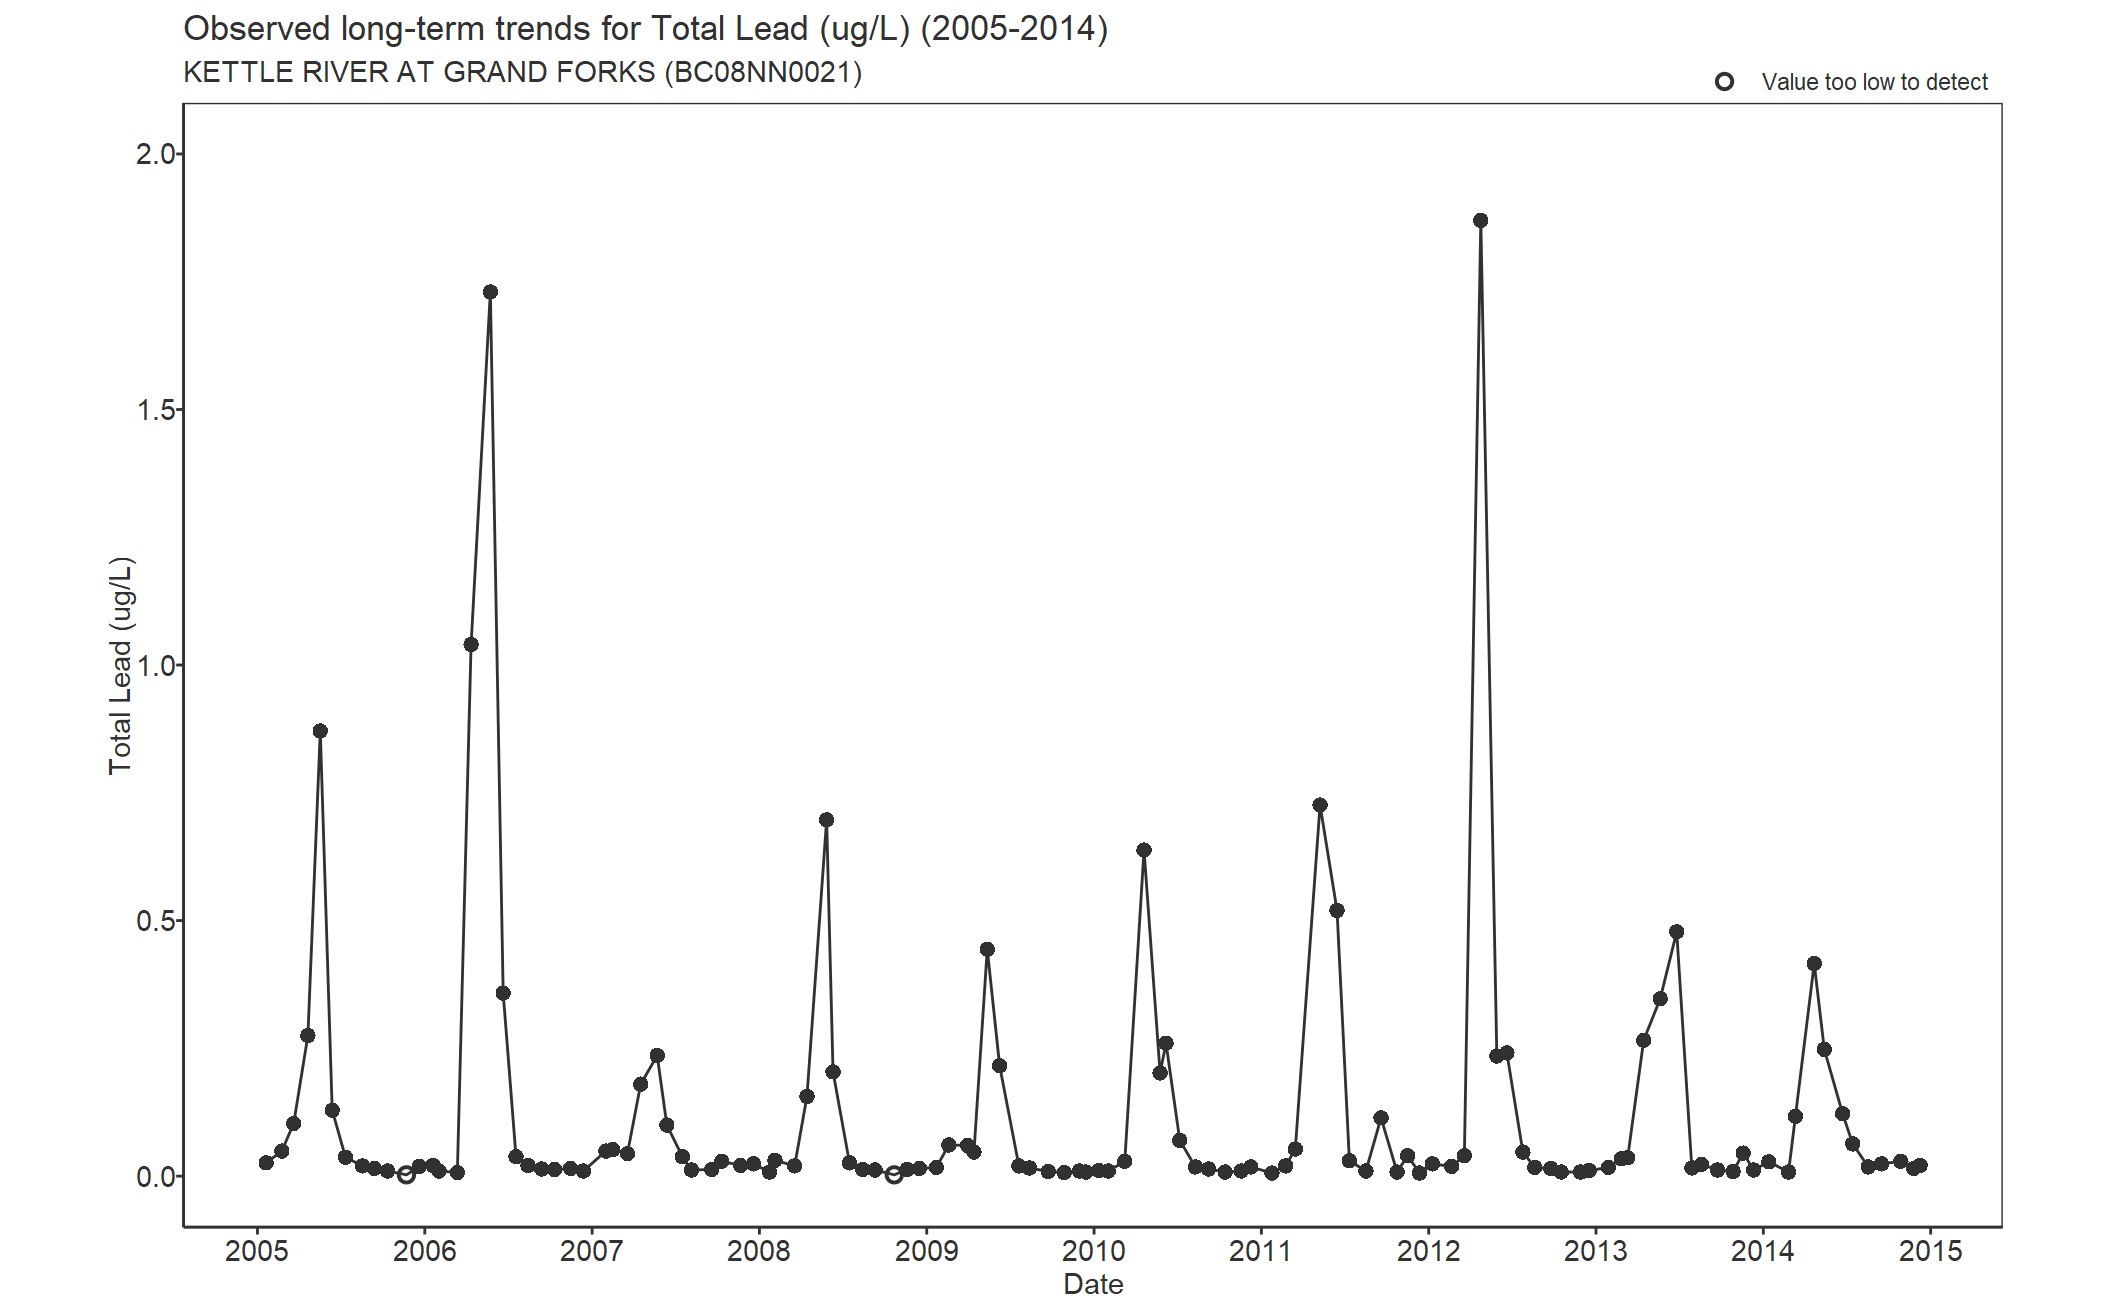 Observed long-term trends for Lead Total (2005-2014)